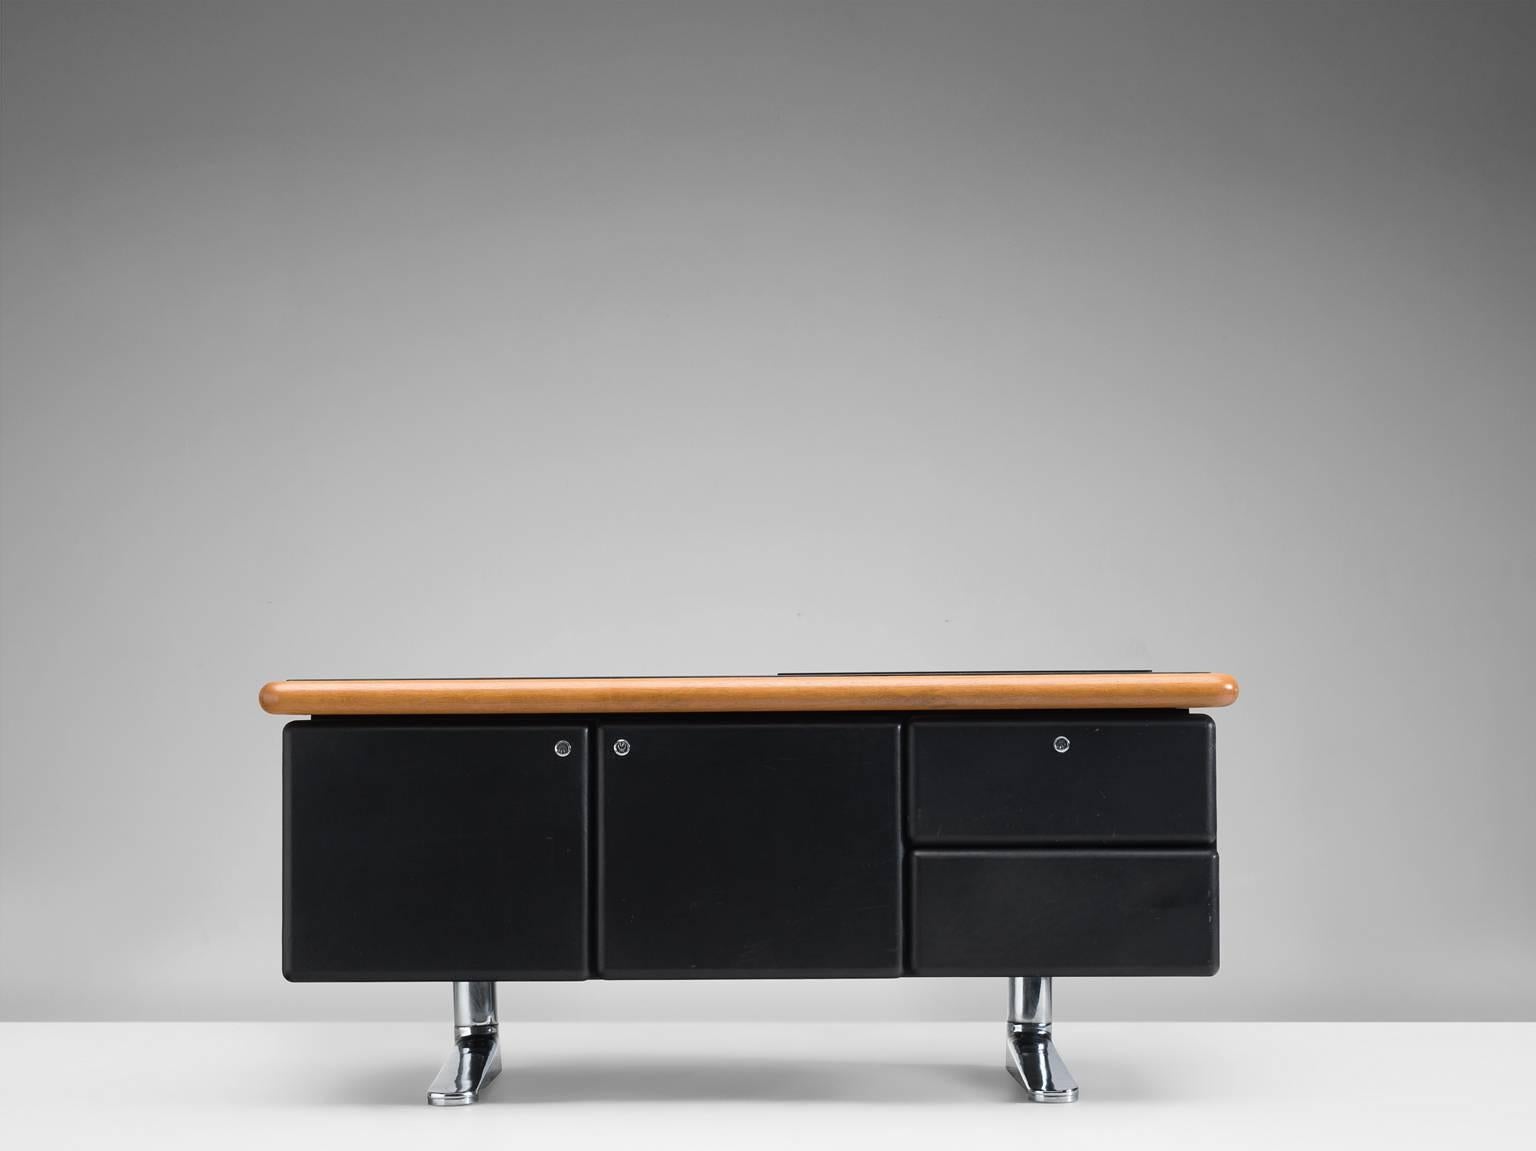 Warren Platner, black sideboard for Knoll, United States, 1973.

This sturdy credenza is designed by the American modernist Warren Platner. He is mostly known for his airy metal, sculptural lounge chairs. In a way it is surprising this sideboard